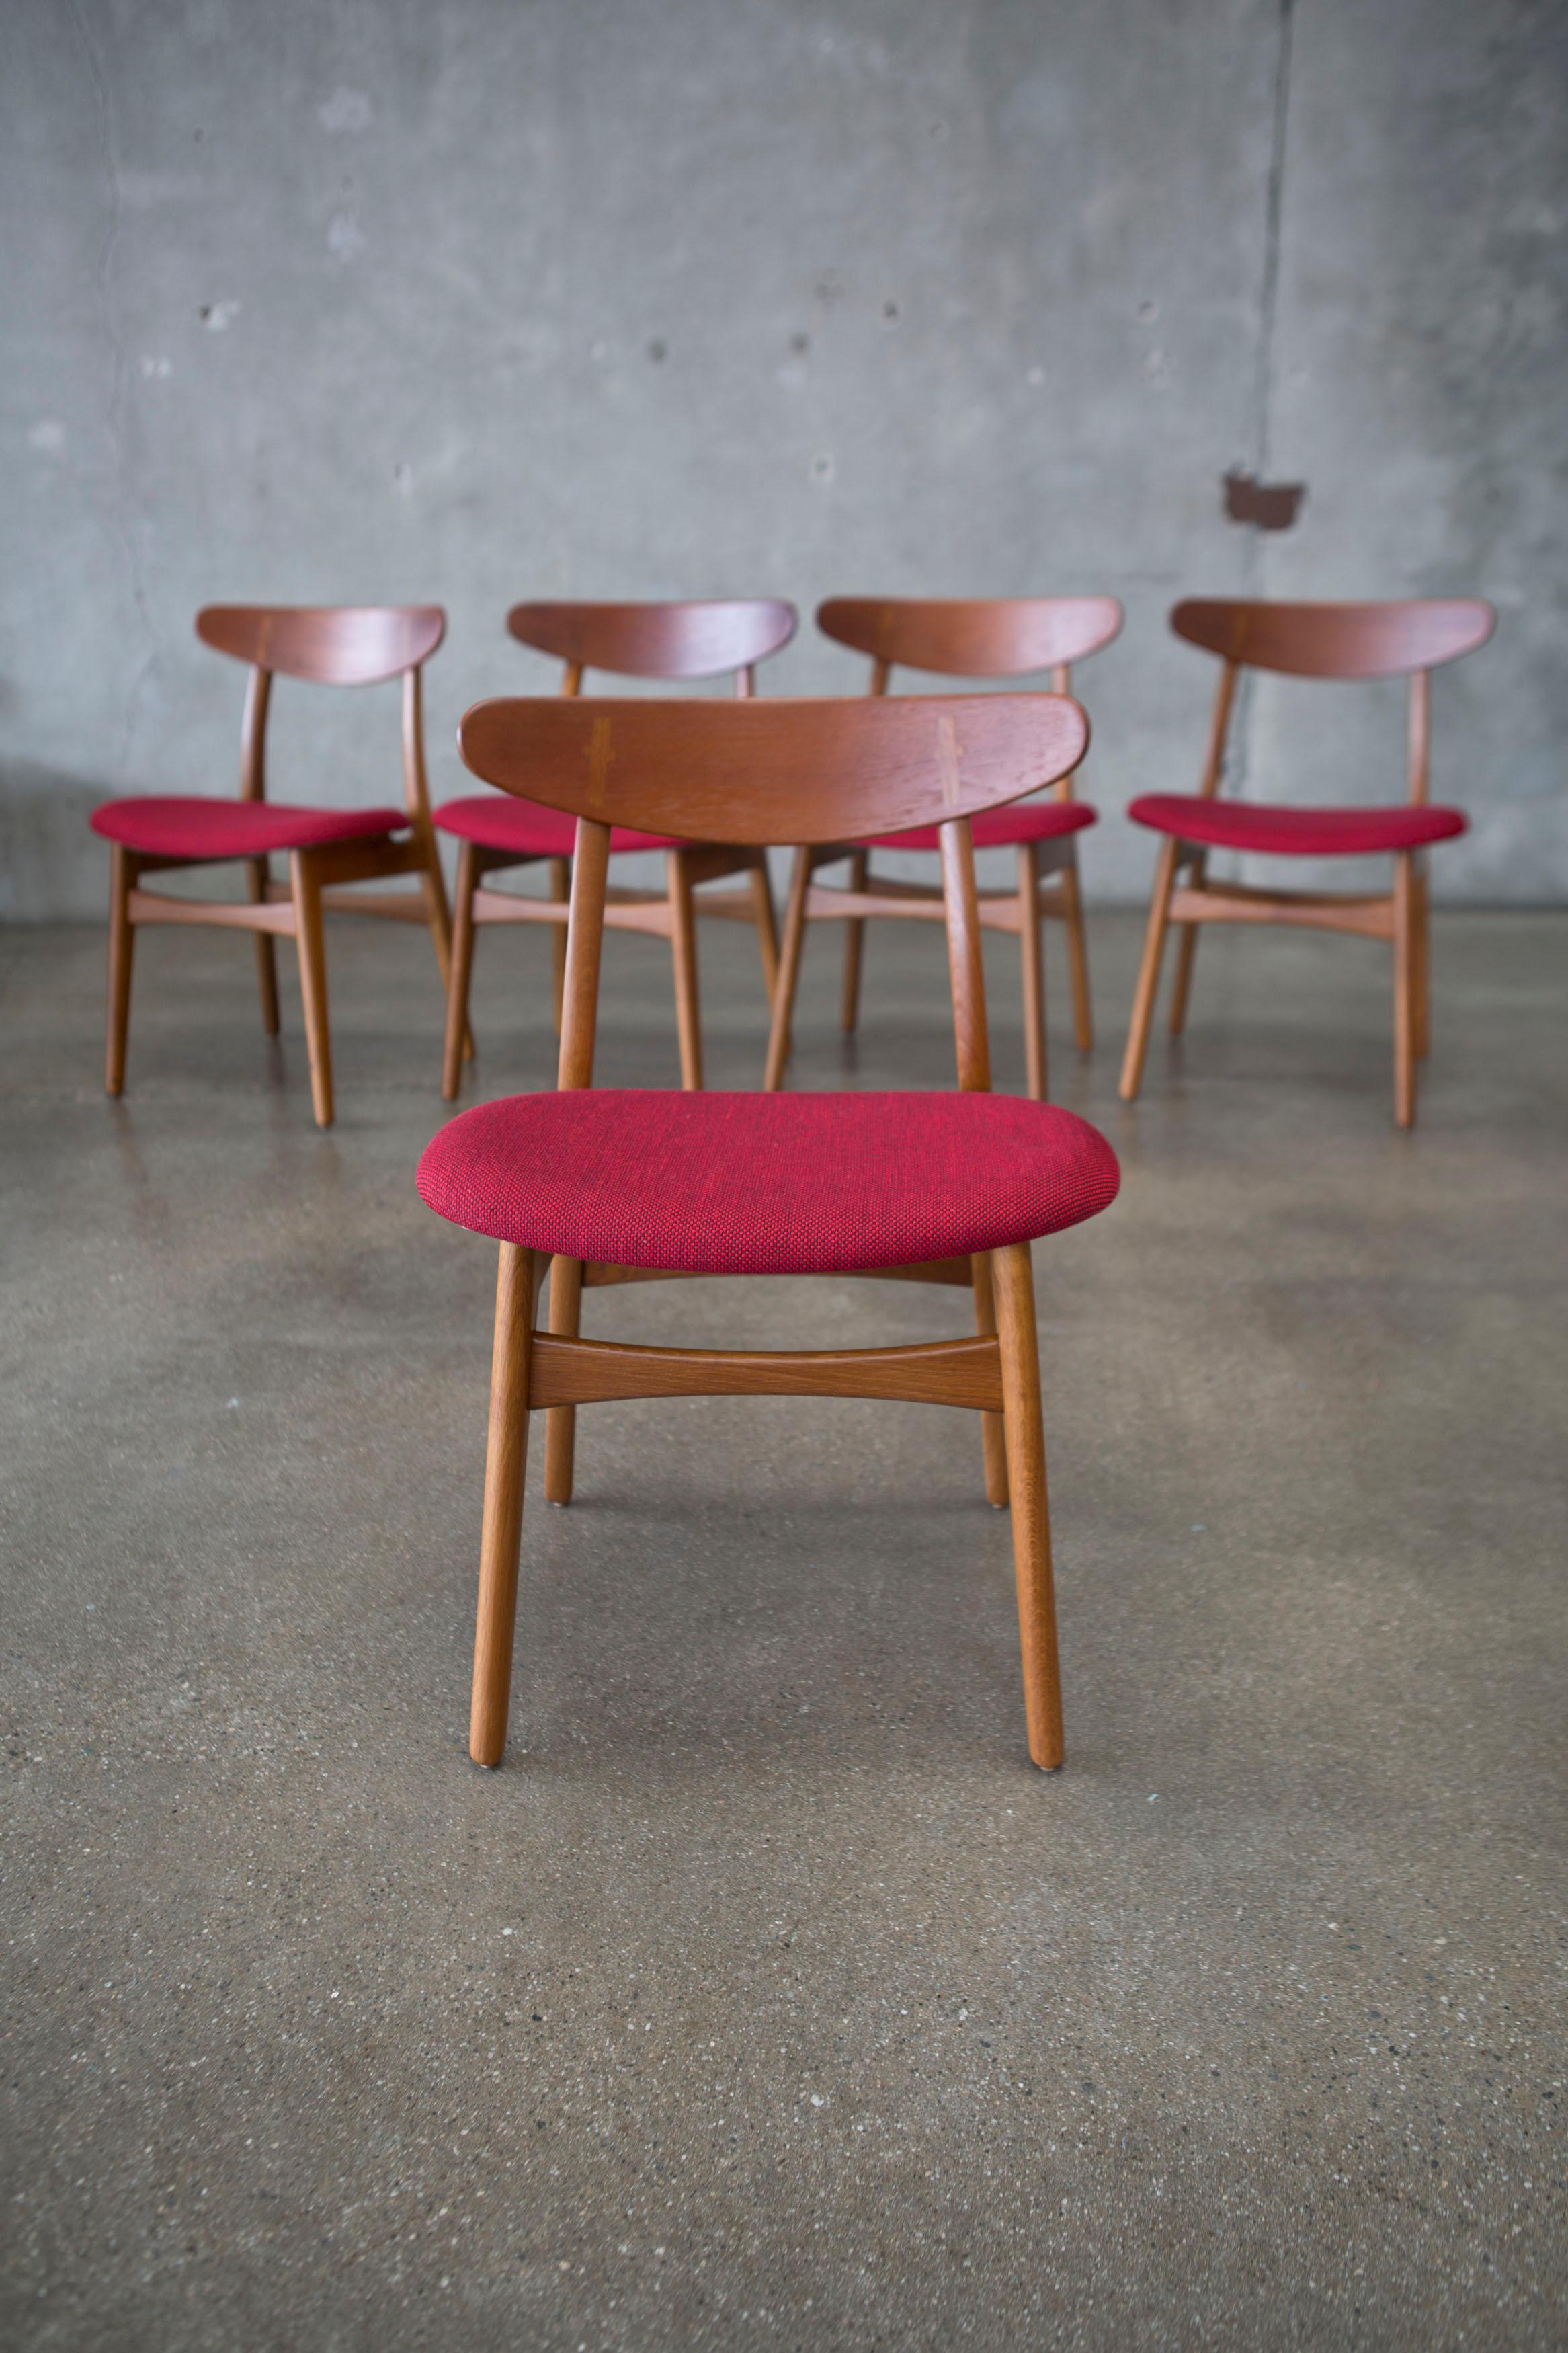 Hans J. Wegner CH30 chairs in teak and oak set of five, Denmark, 1950s

The straight forward design has become an iconic Classic. The exposed joint between the backrest and rear post is a feature seen in other Wegner pieces and is a testament to